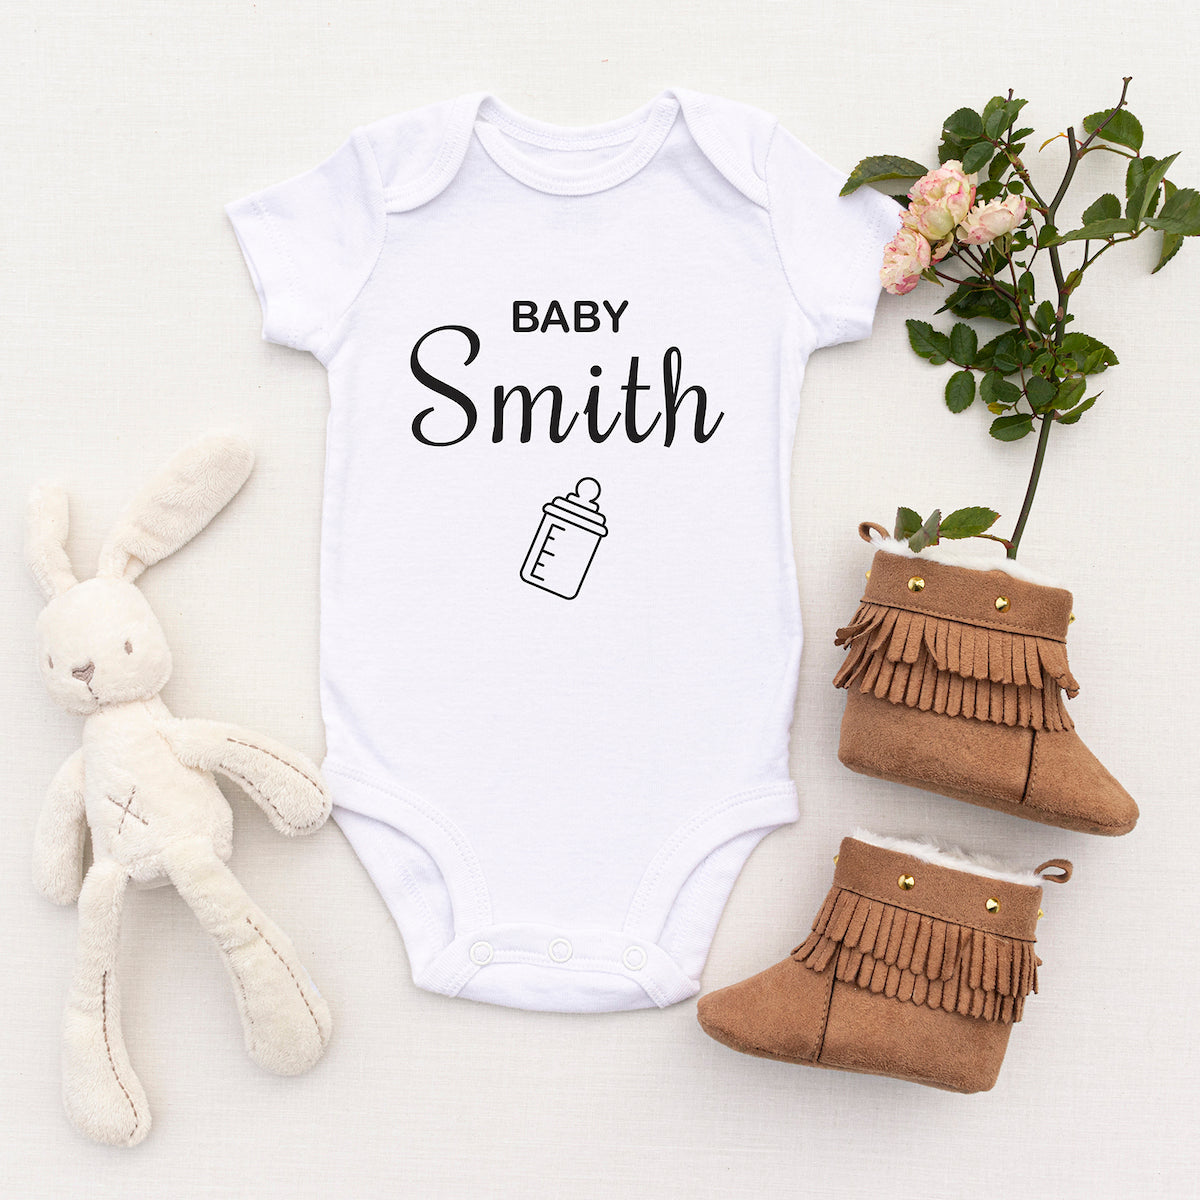 Personalised White Baby Body Suit Grow Vest - Bottle